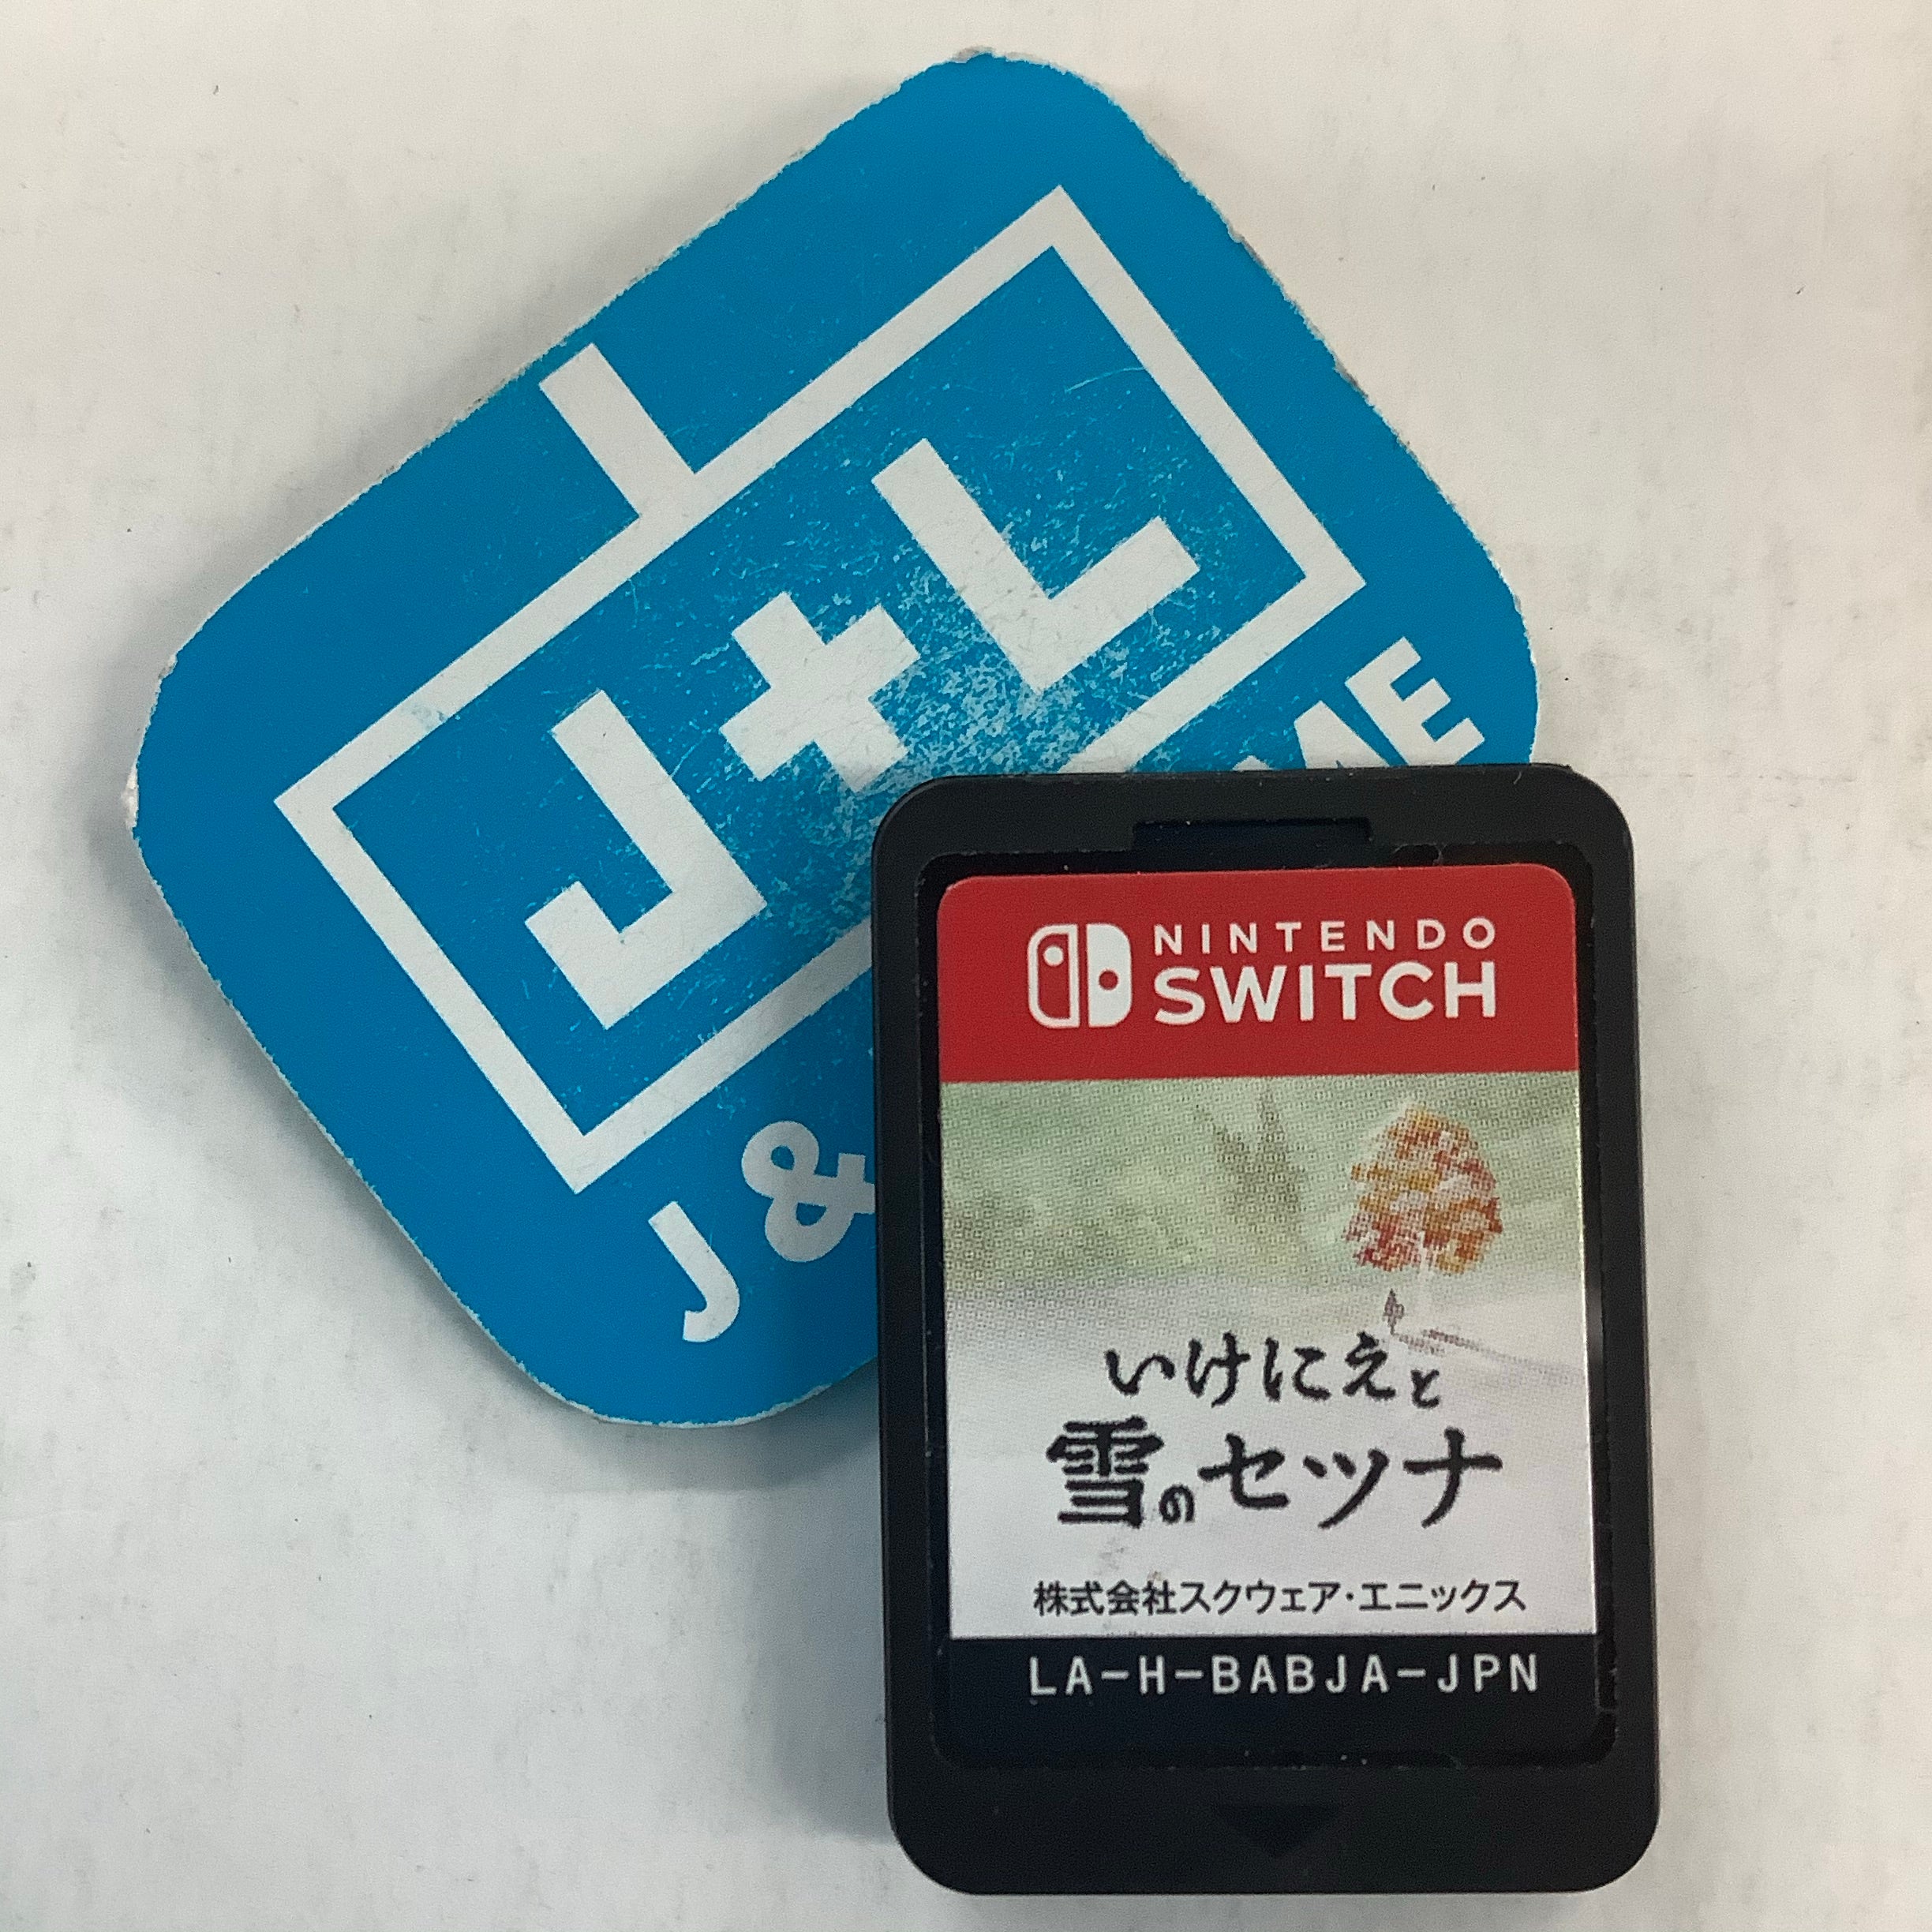 I Am Setsuna - (NSW) Nintendo Switch [Pre-Owned] (Japanese Import) Video Games Square Enix   